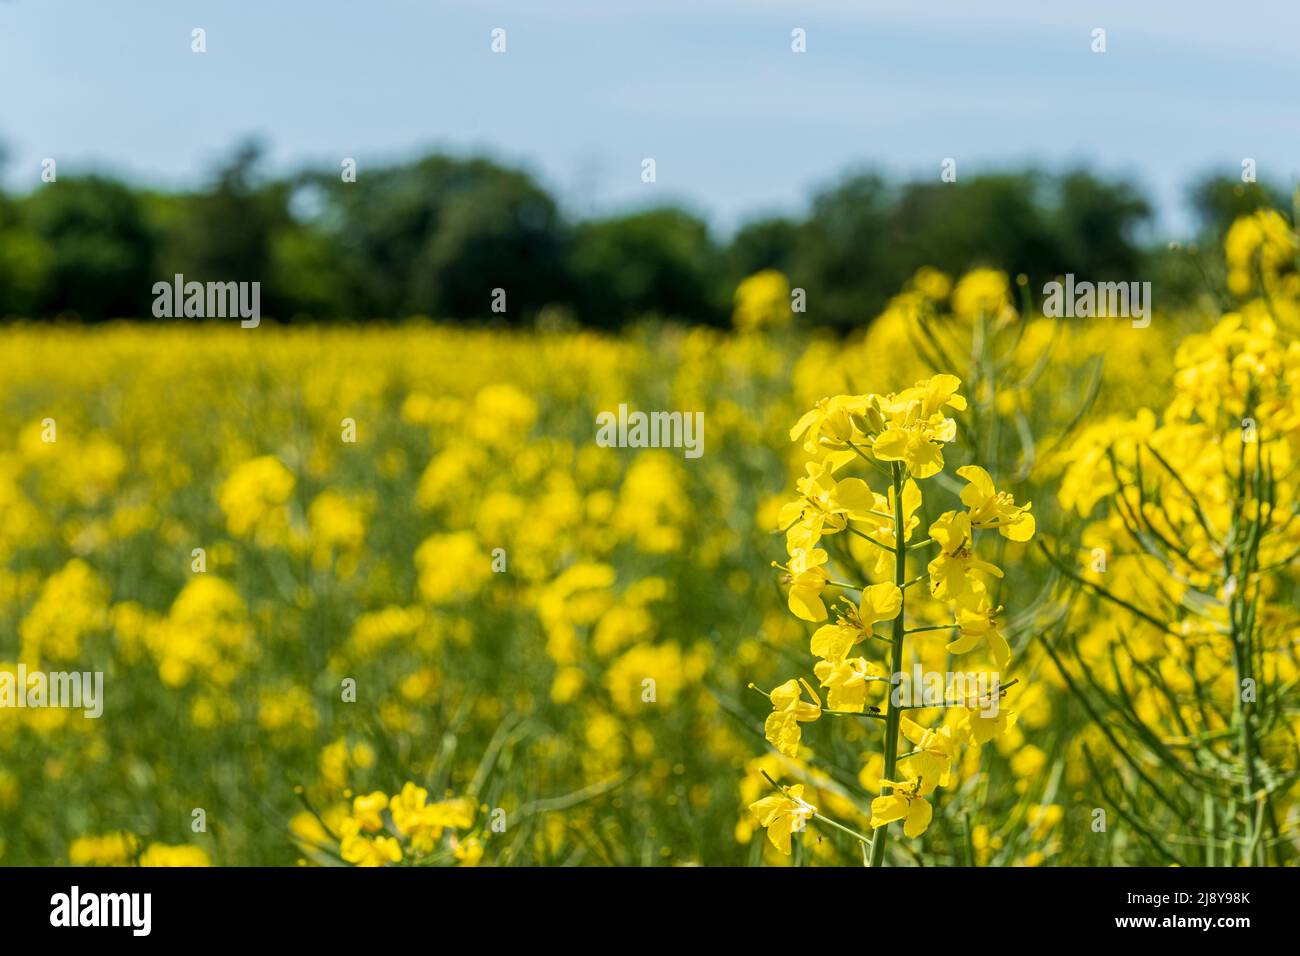 Close-up of an inflorescence with many yellow rapeseed flowers  Stock Photo